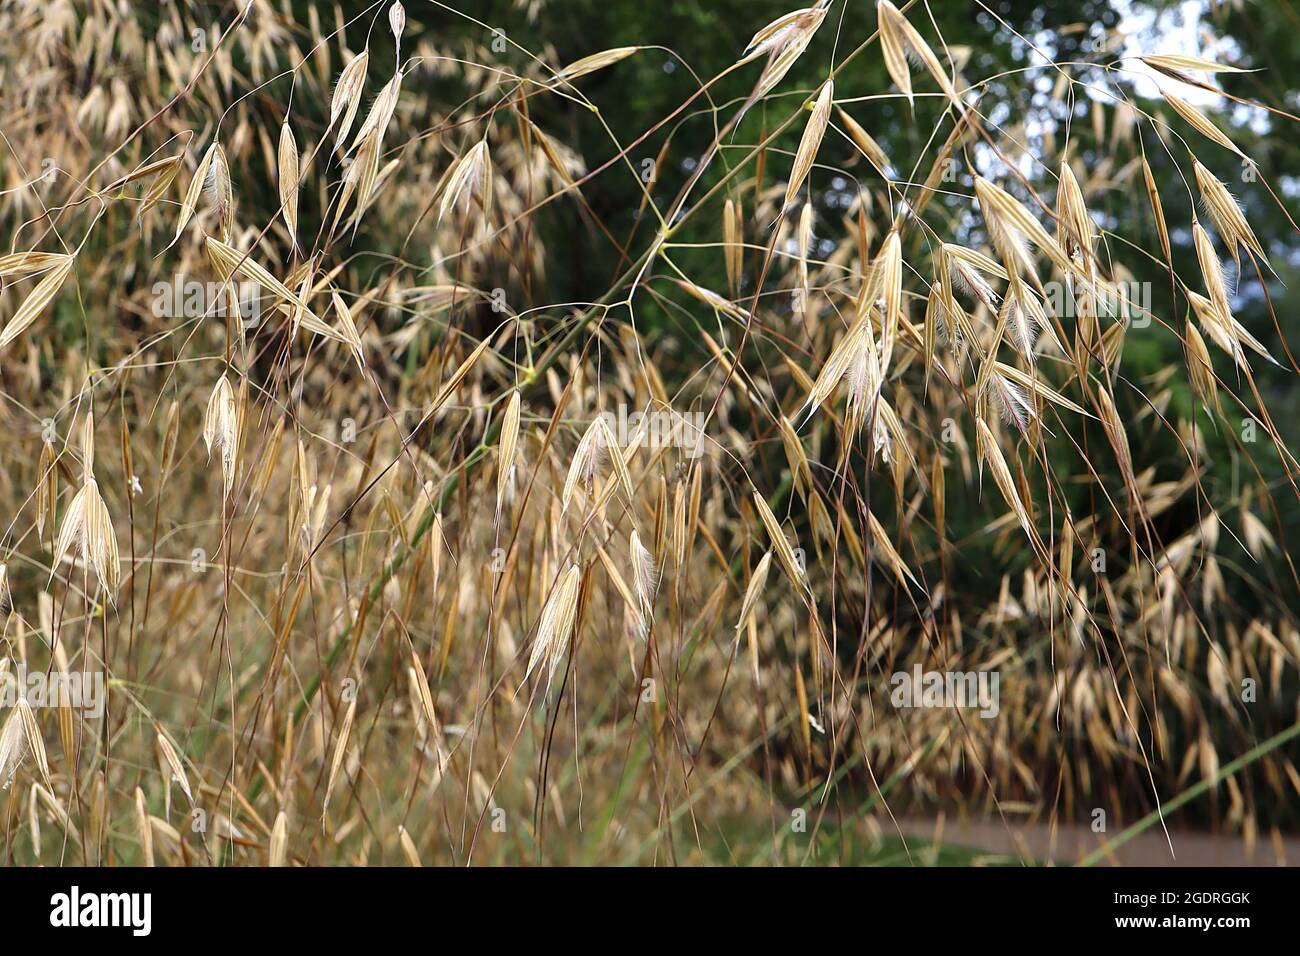 Stipa gigantea golden oats – widely spaced buff gold spikelets in loose panicles on very tall green stems,  July, England, UK Stock Photo